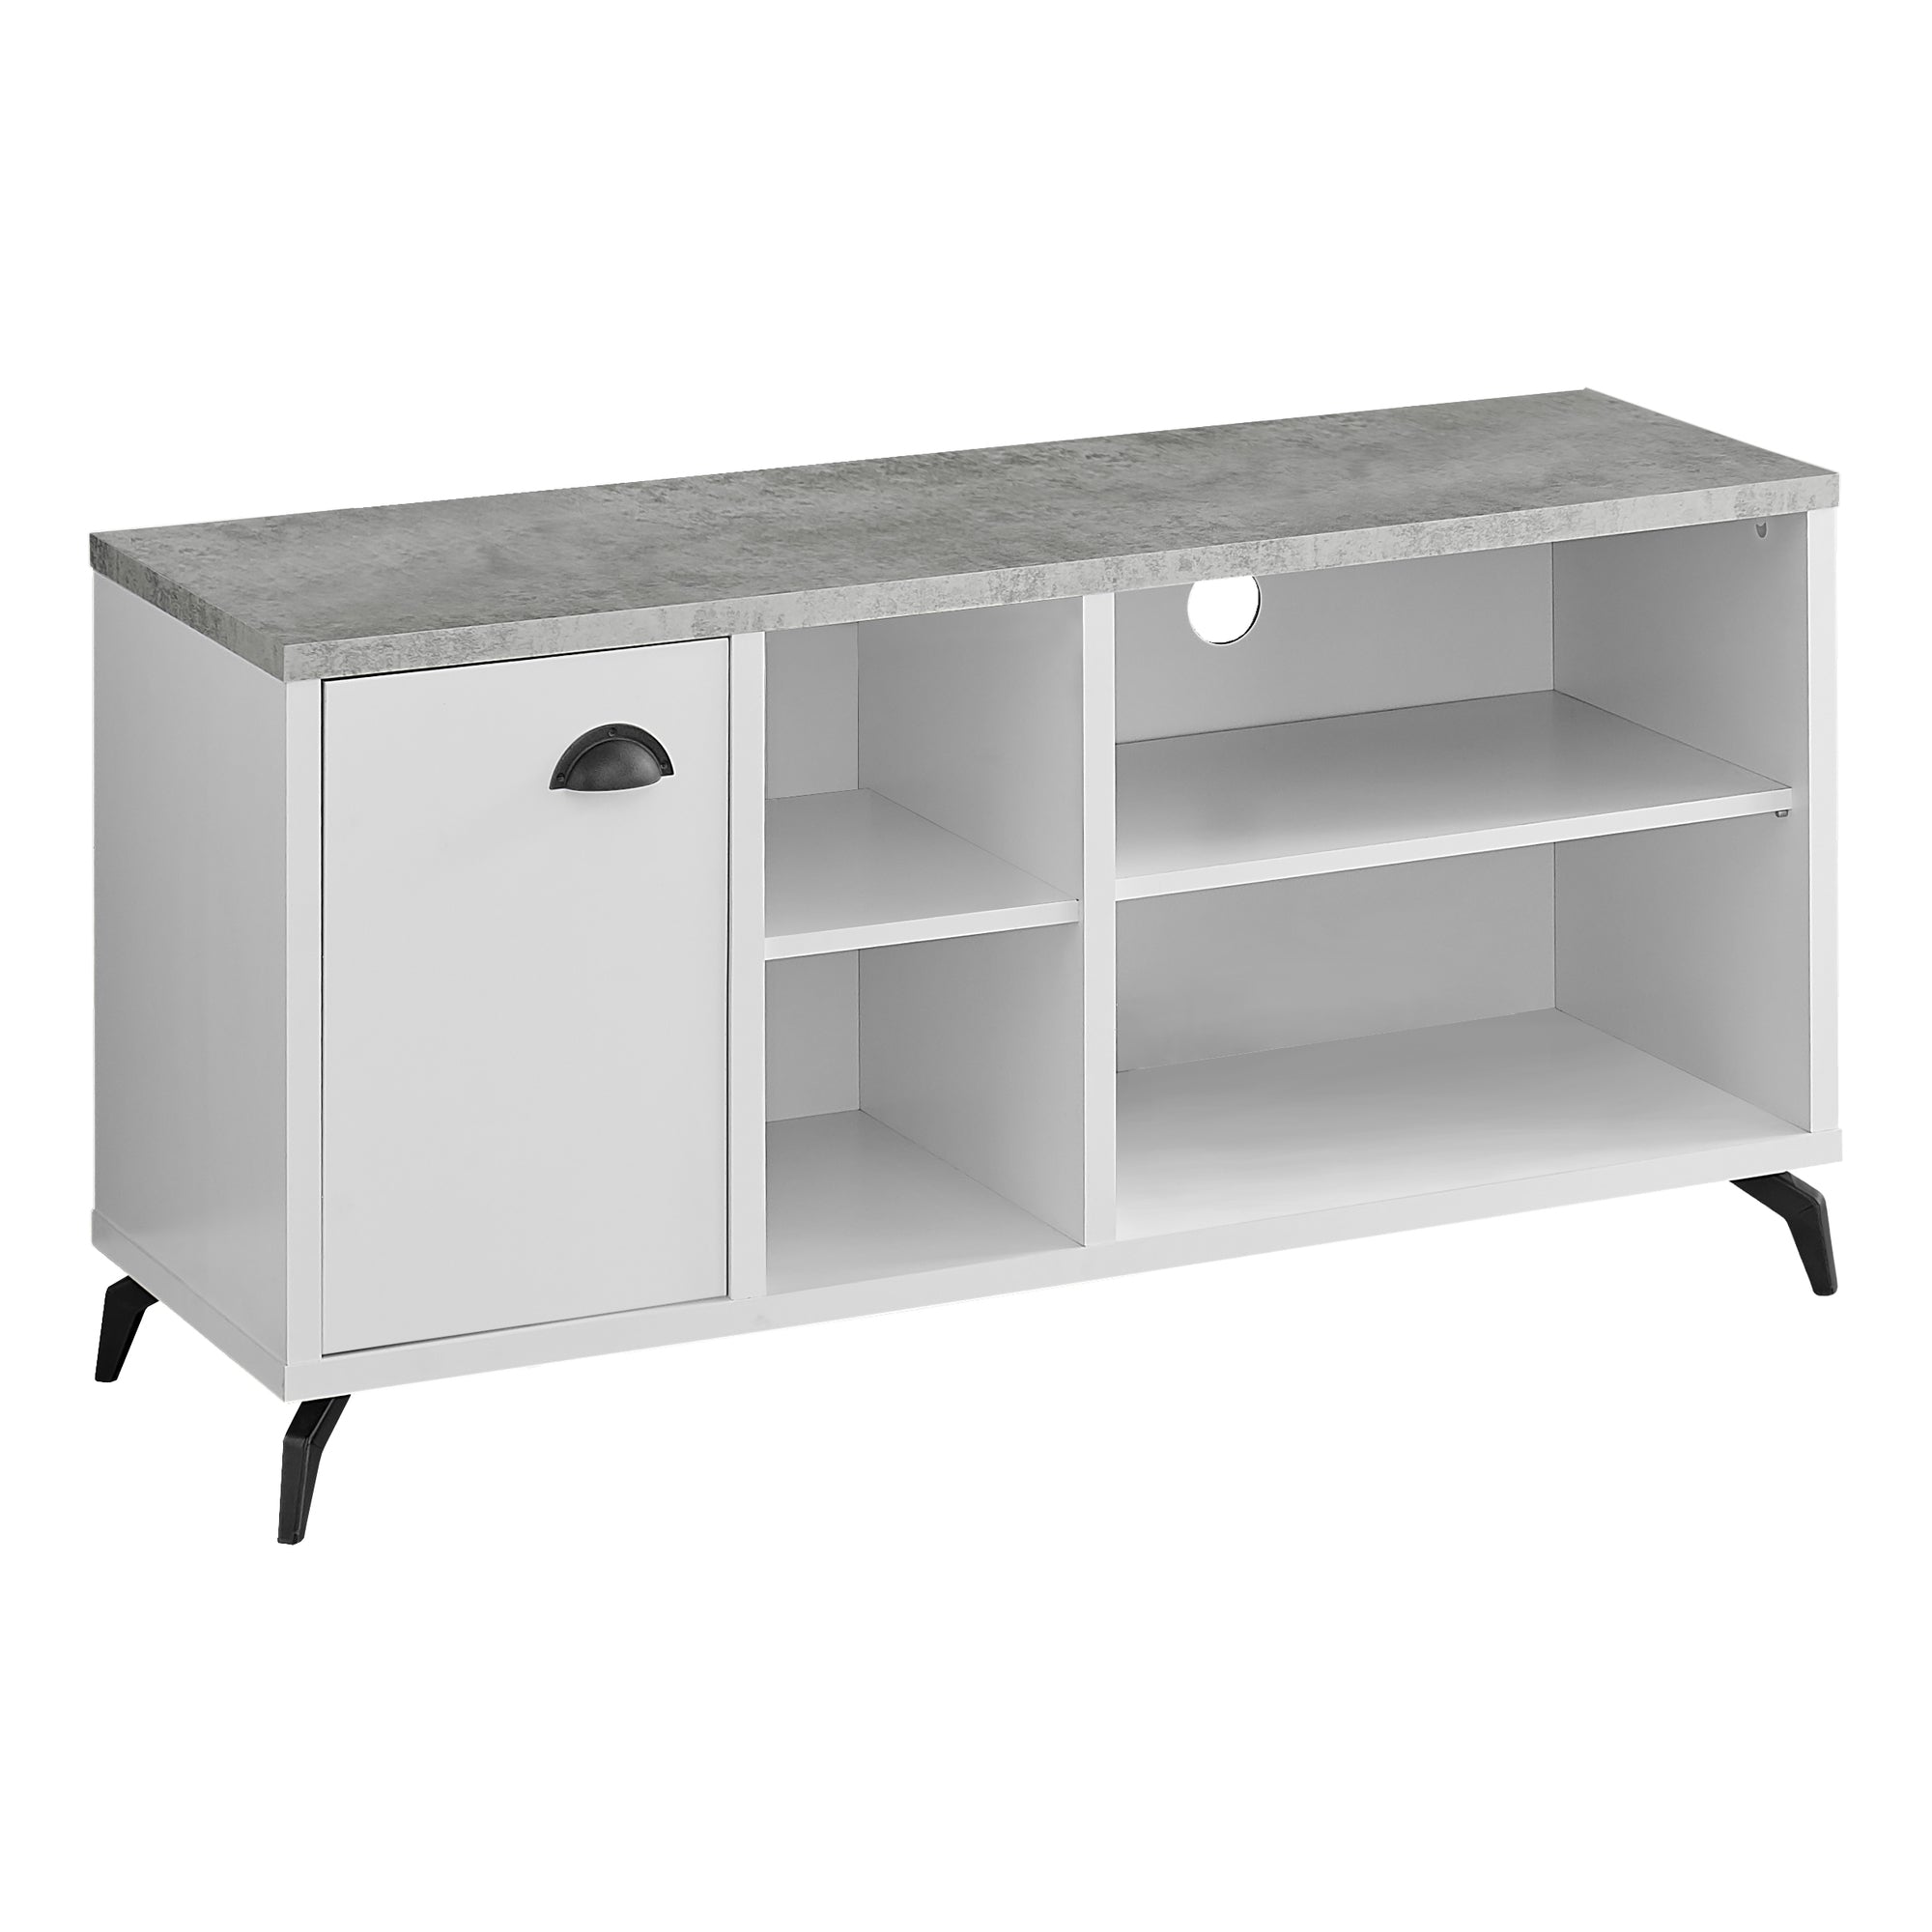 MN-532840    Tv Stand, 48 Inch, Console, Media Entertainment Center, Storage Cabinet, Living Room, Bedroom, Laminate, Metal, Grey Cement Look, Contemporary, Modern